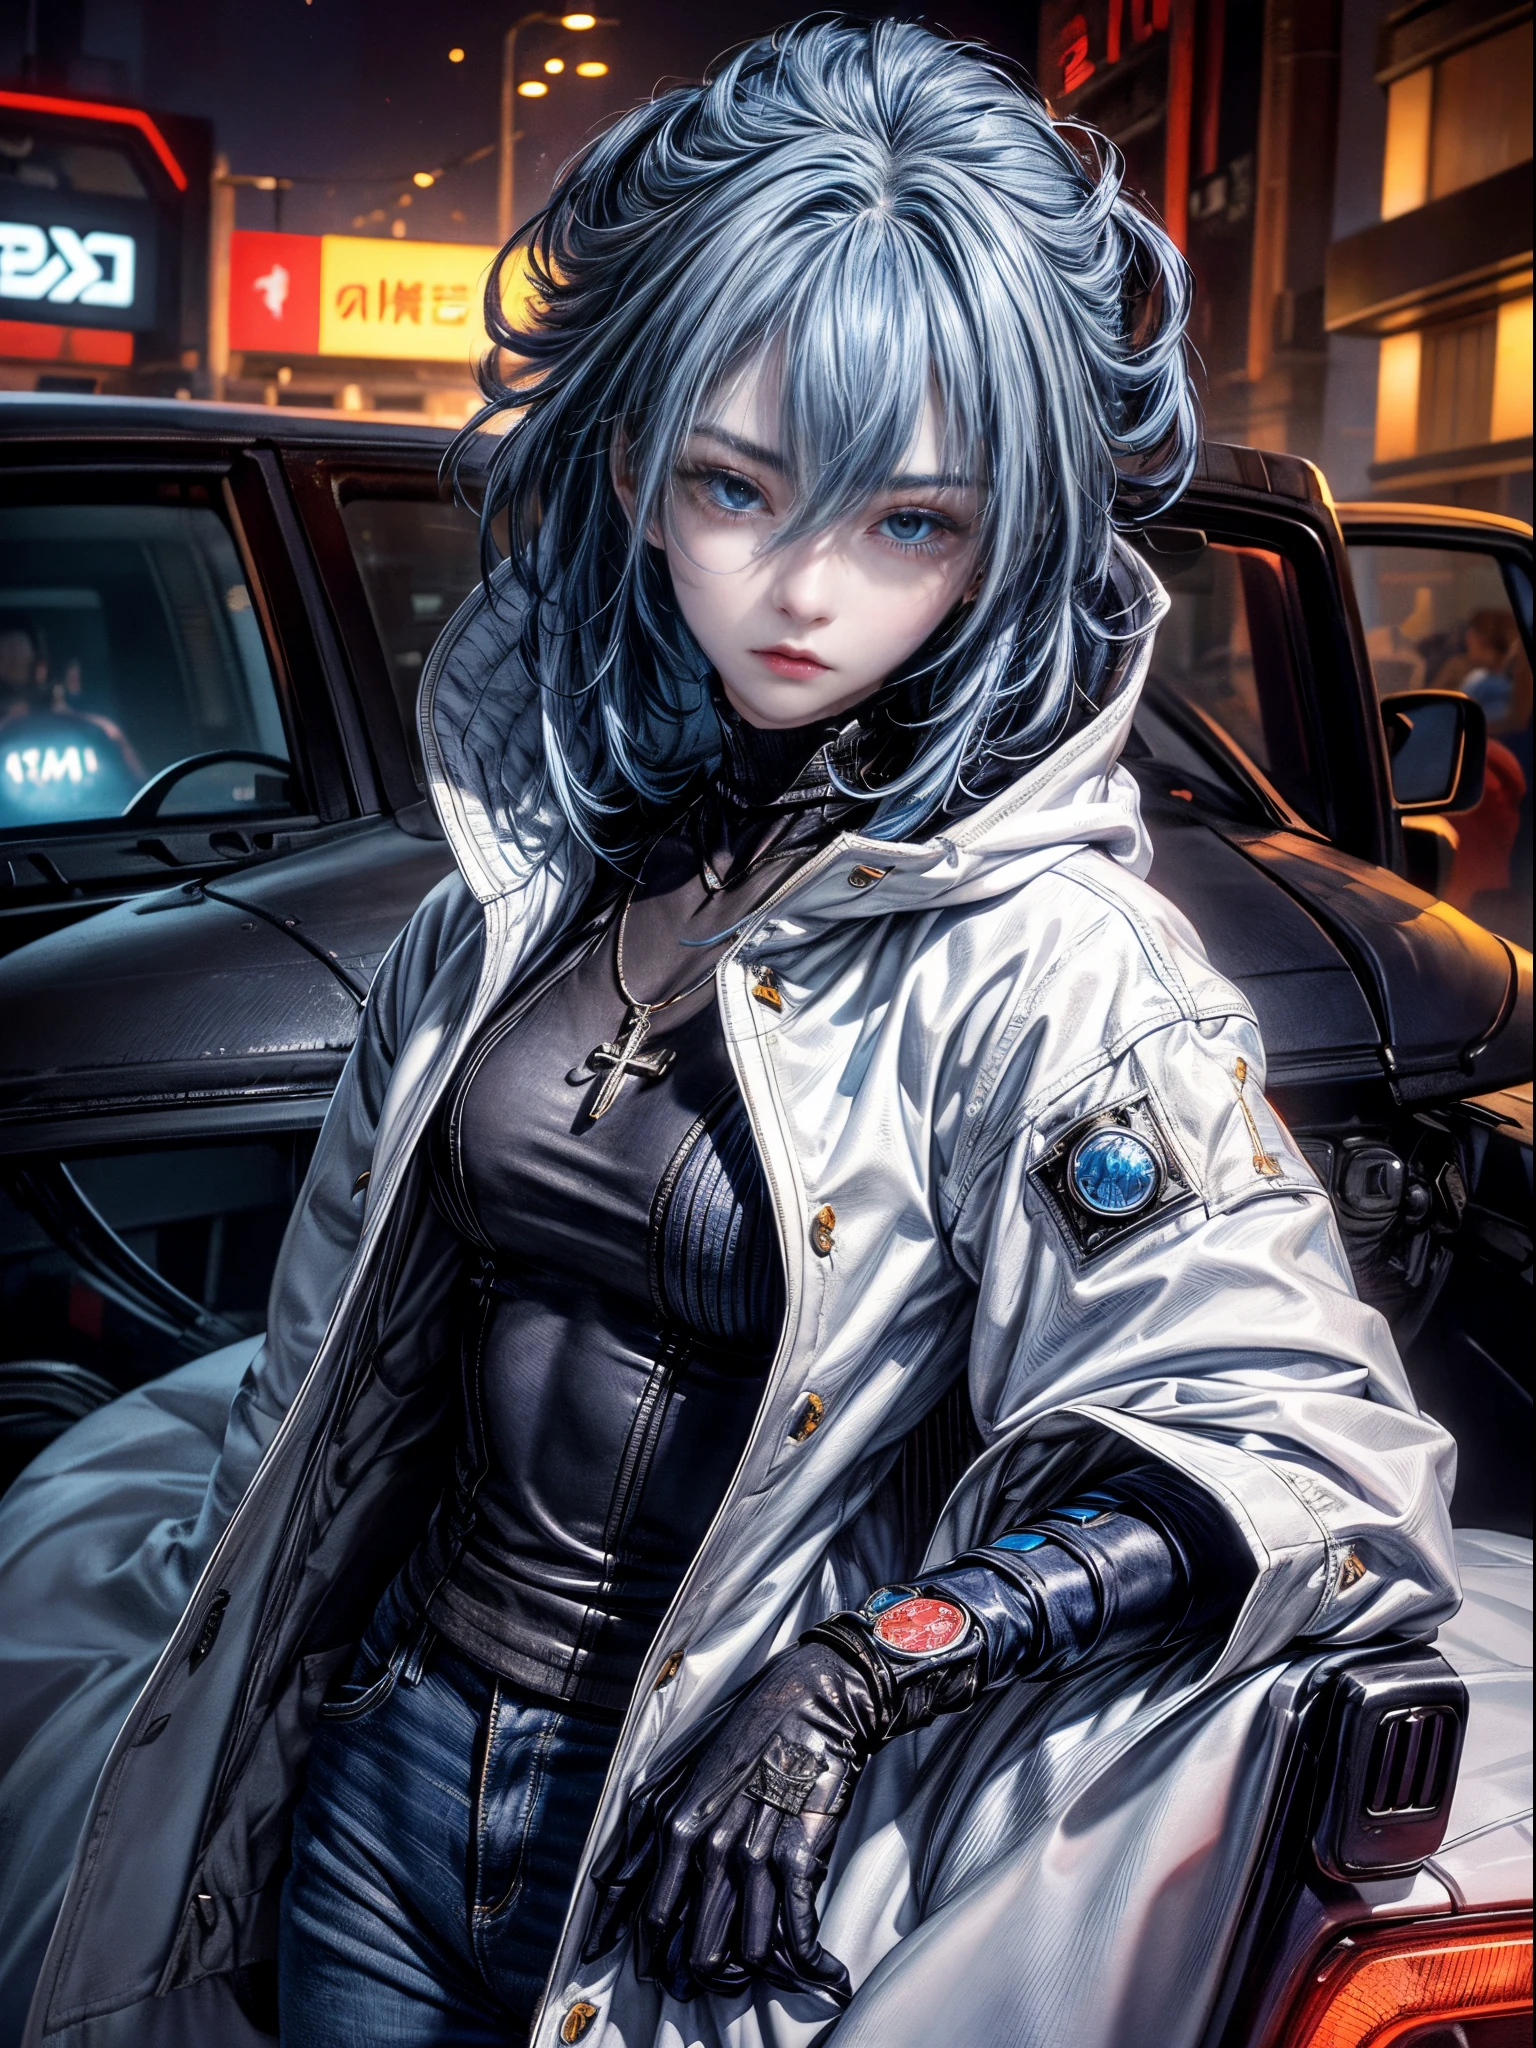 Cinematic lighting、16k picture quality、highlydetailed skin,(1girl in, Solo:1.2)、Best Quality,cyberpunked,(1beautiful woman、Detailed beautiful facial features hair、Blue hair、blue eyess:1.3)rosary necklace BREAK、white down jacket with hood、Knit tops with a shaped neckline., shiny stylish leather gloves、Denim Damage Pantinimal accessories, Watches,Standing near the car、deep in the night（cyber car in the back）underground parking